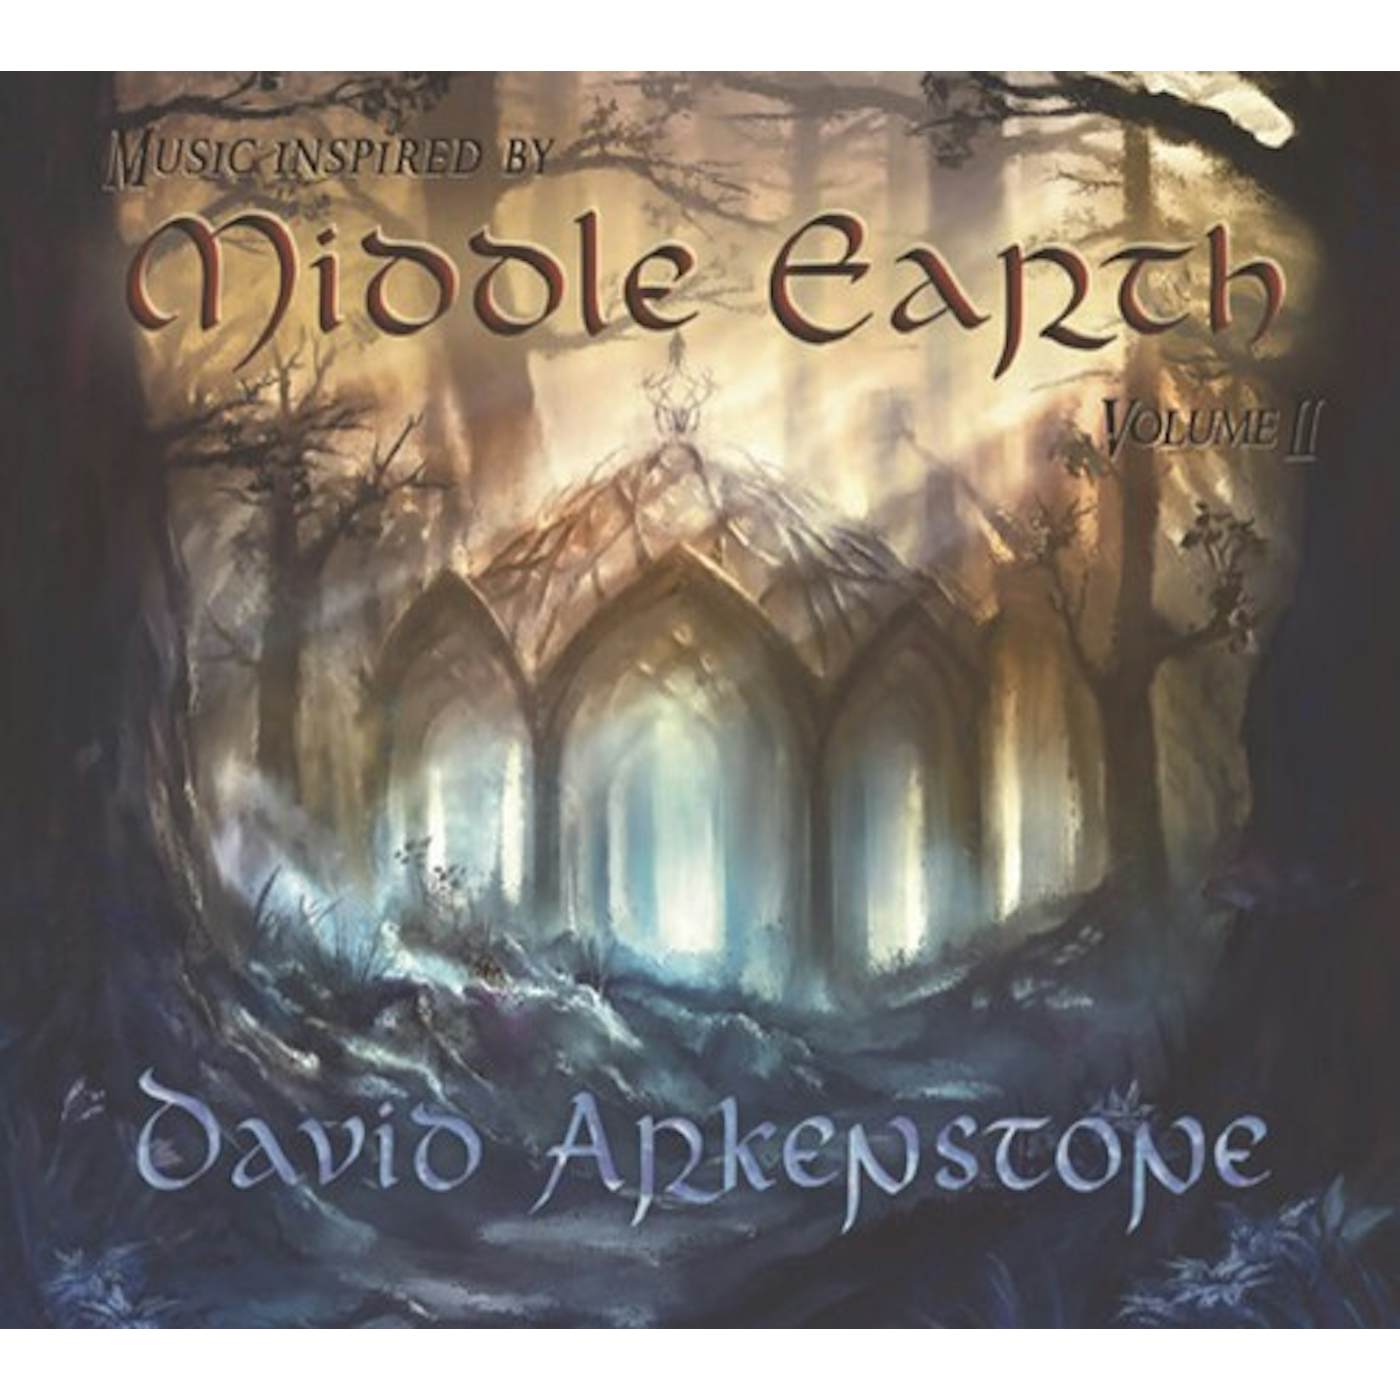 David Arkenstone MUSIC INSPIRED BY MIDDLE EARTH II CD